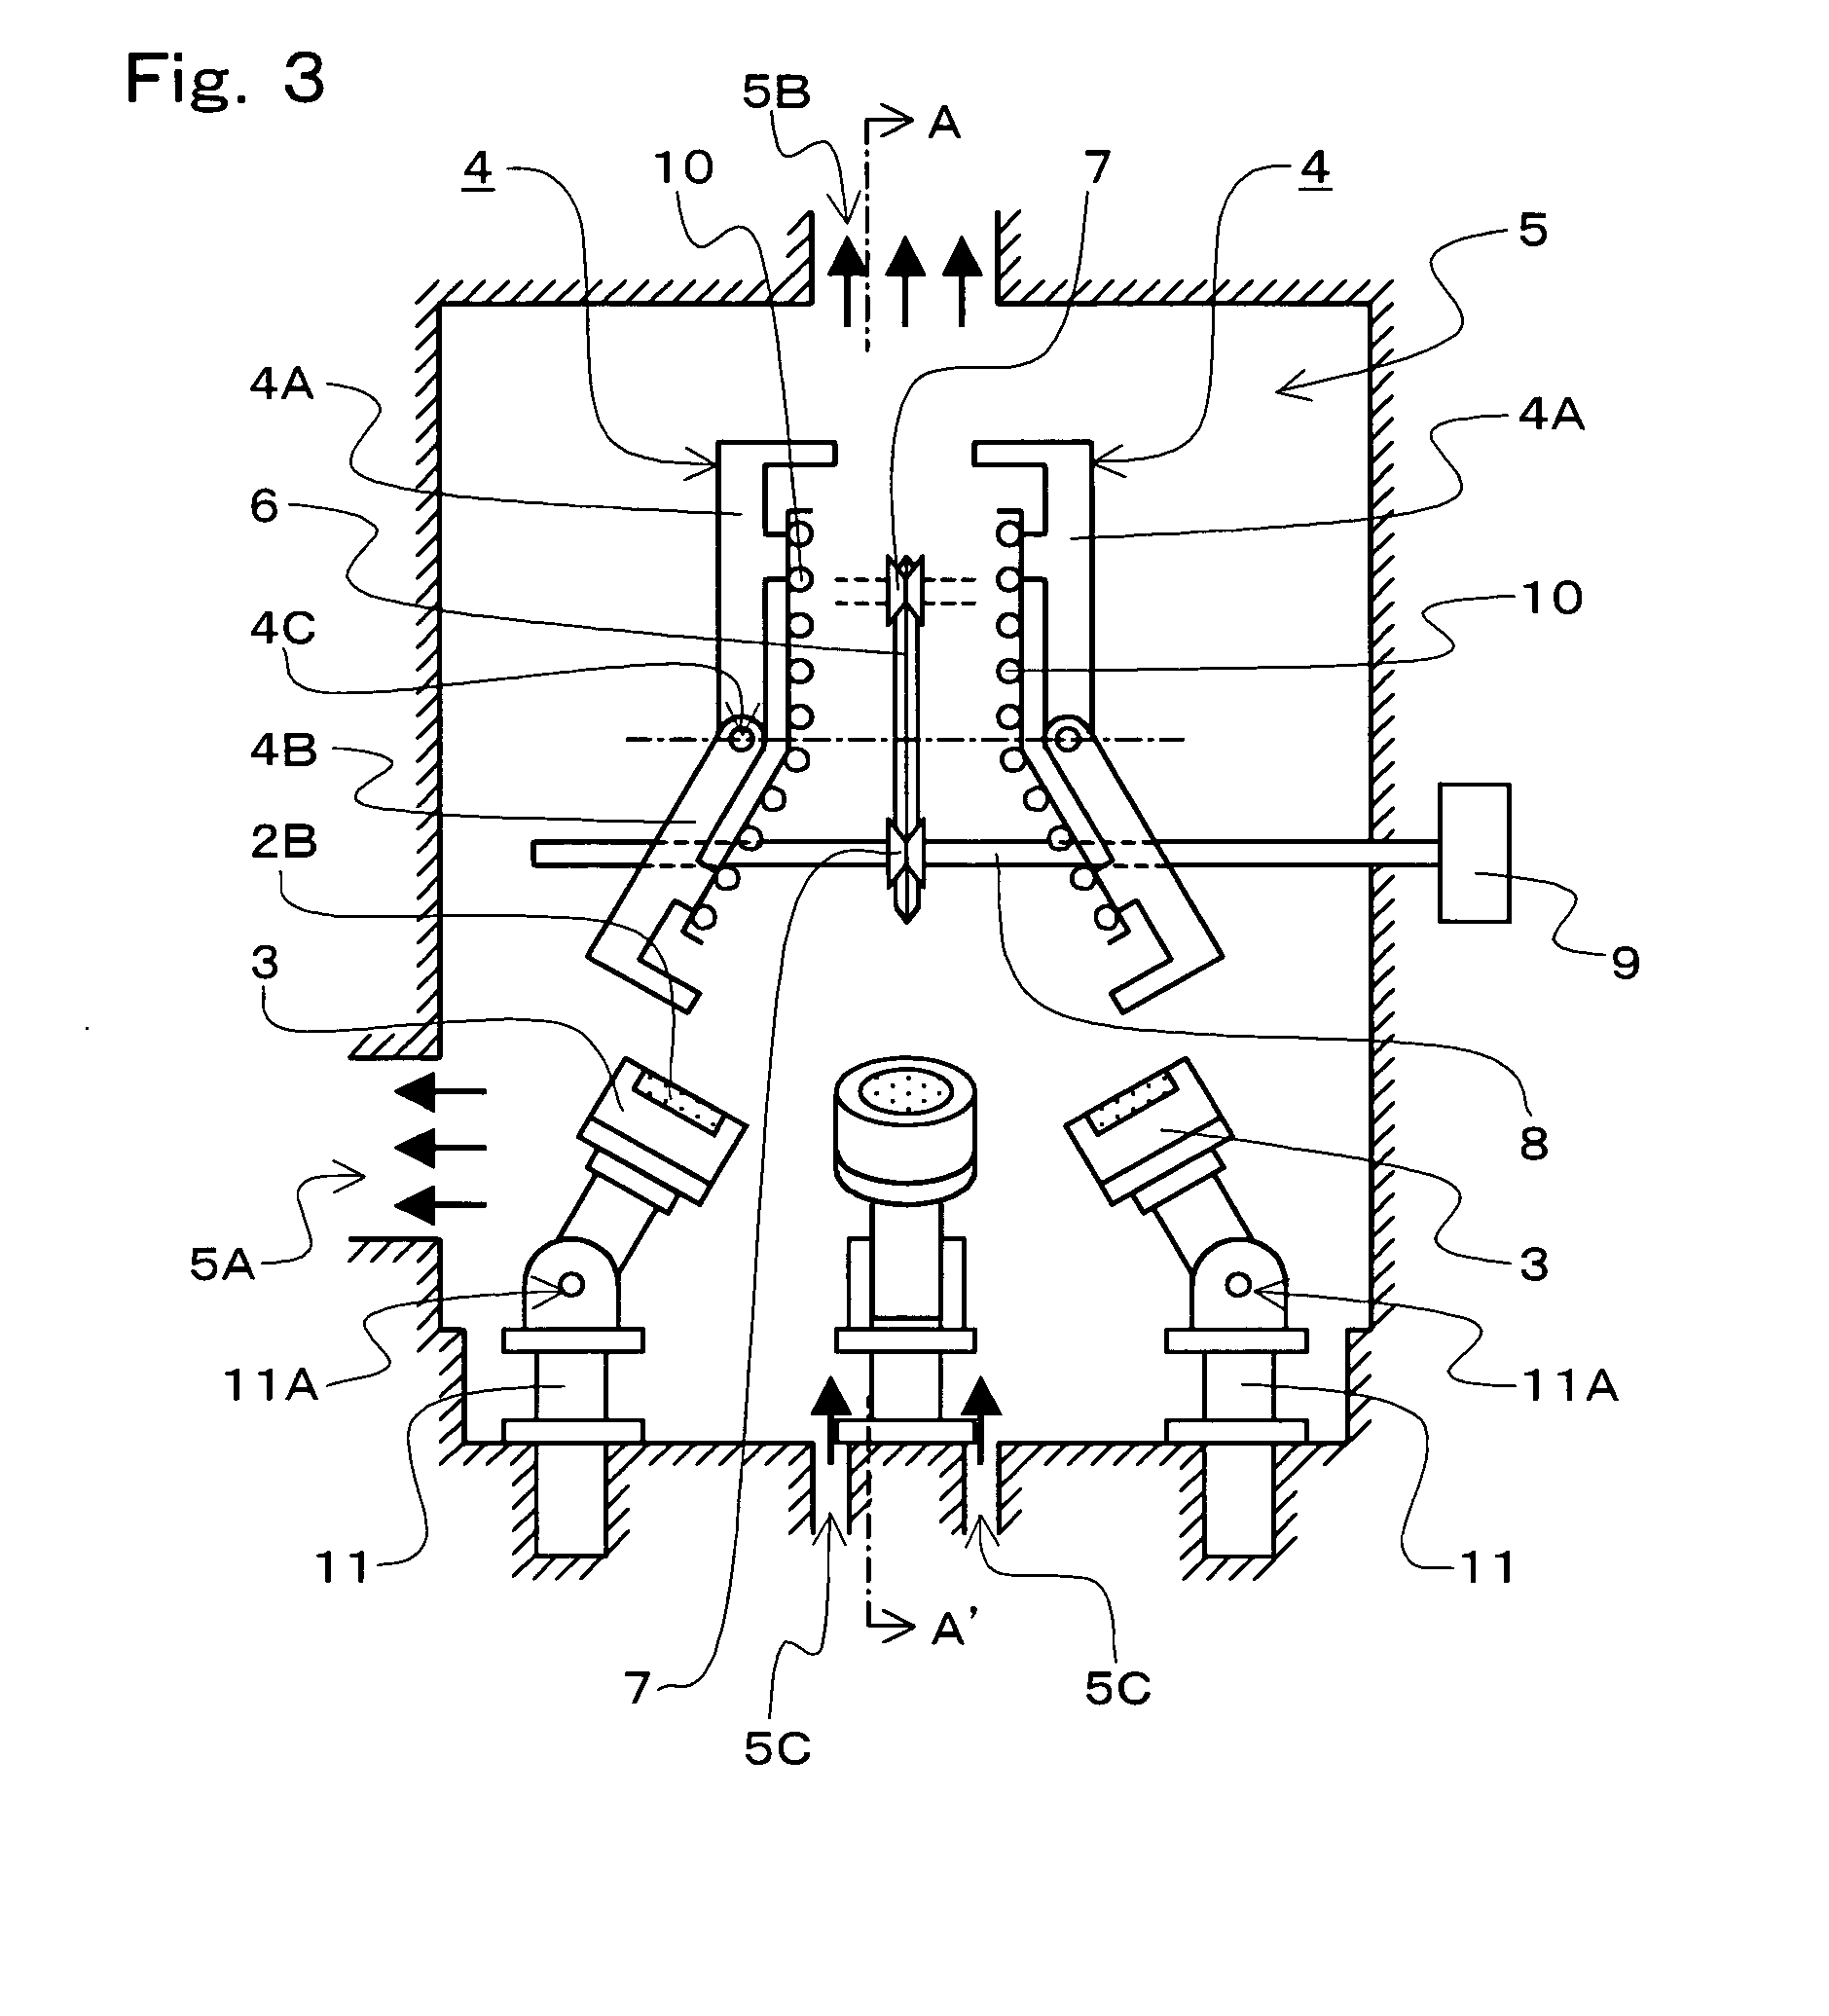 Process for Forming Thin Film and System for Forming Thin Film